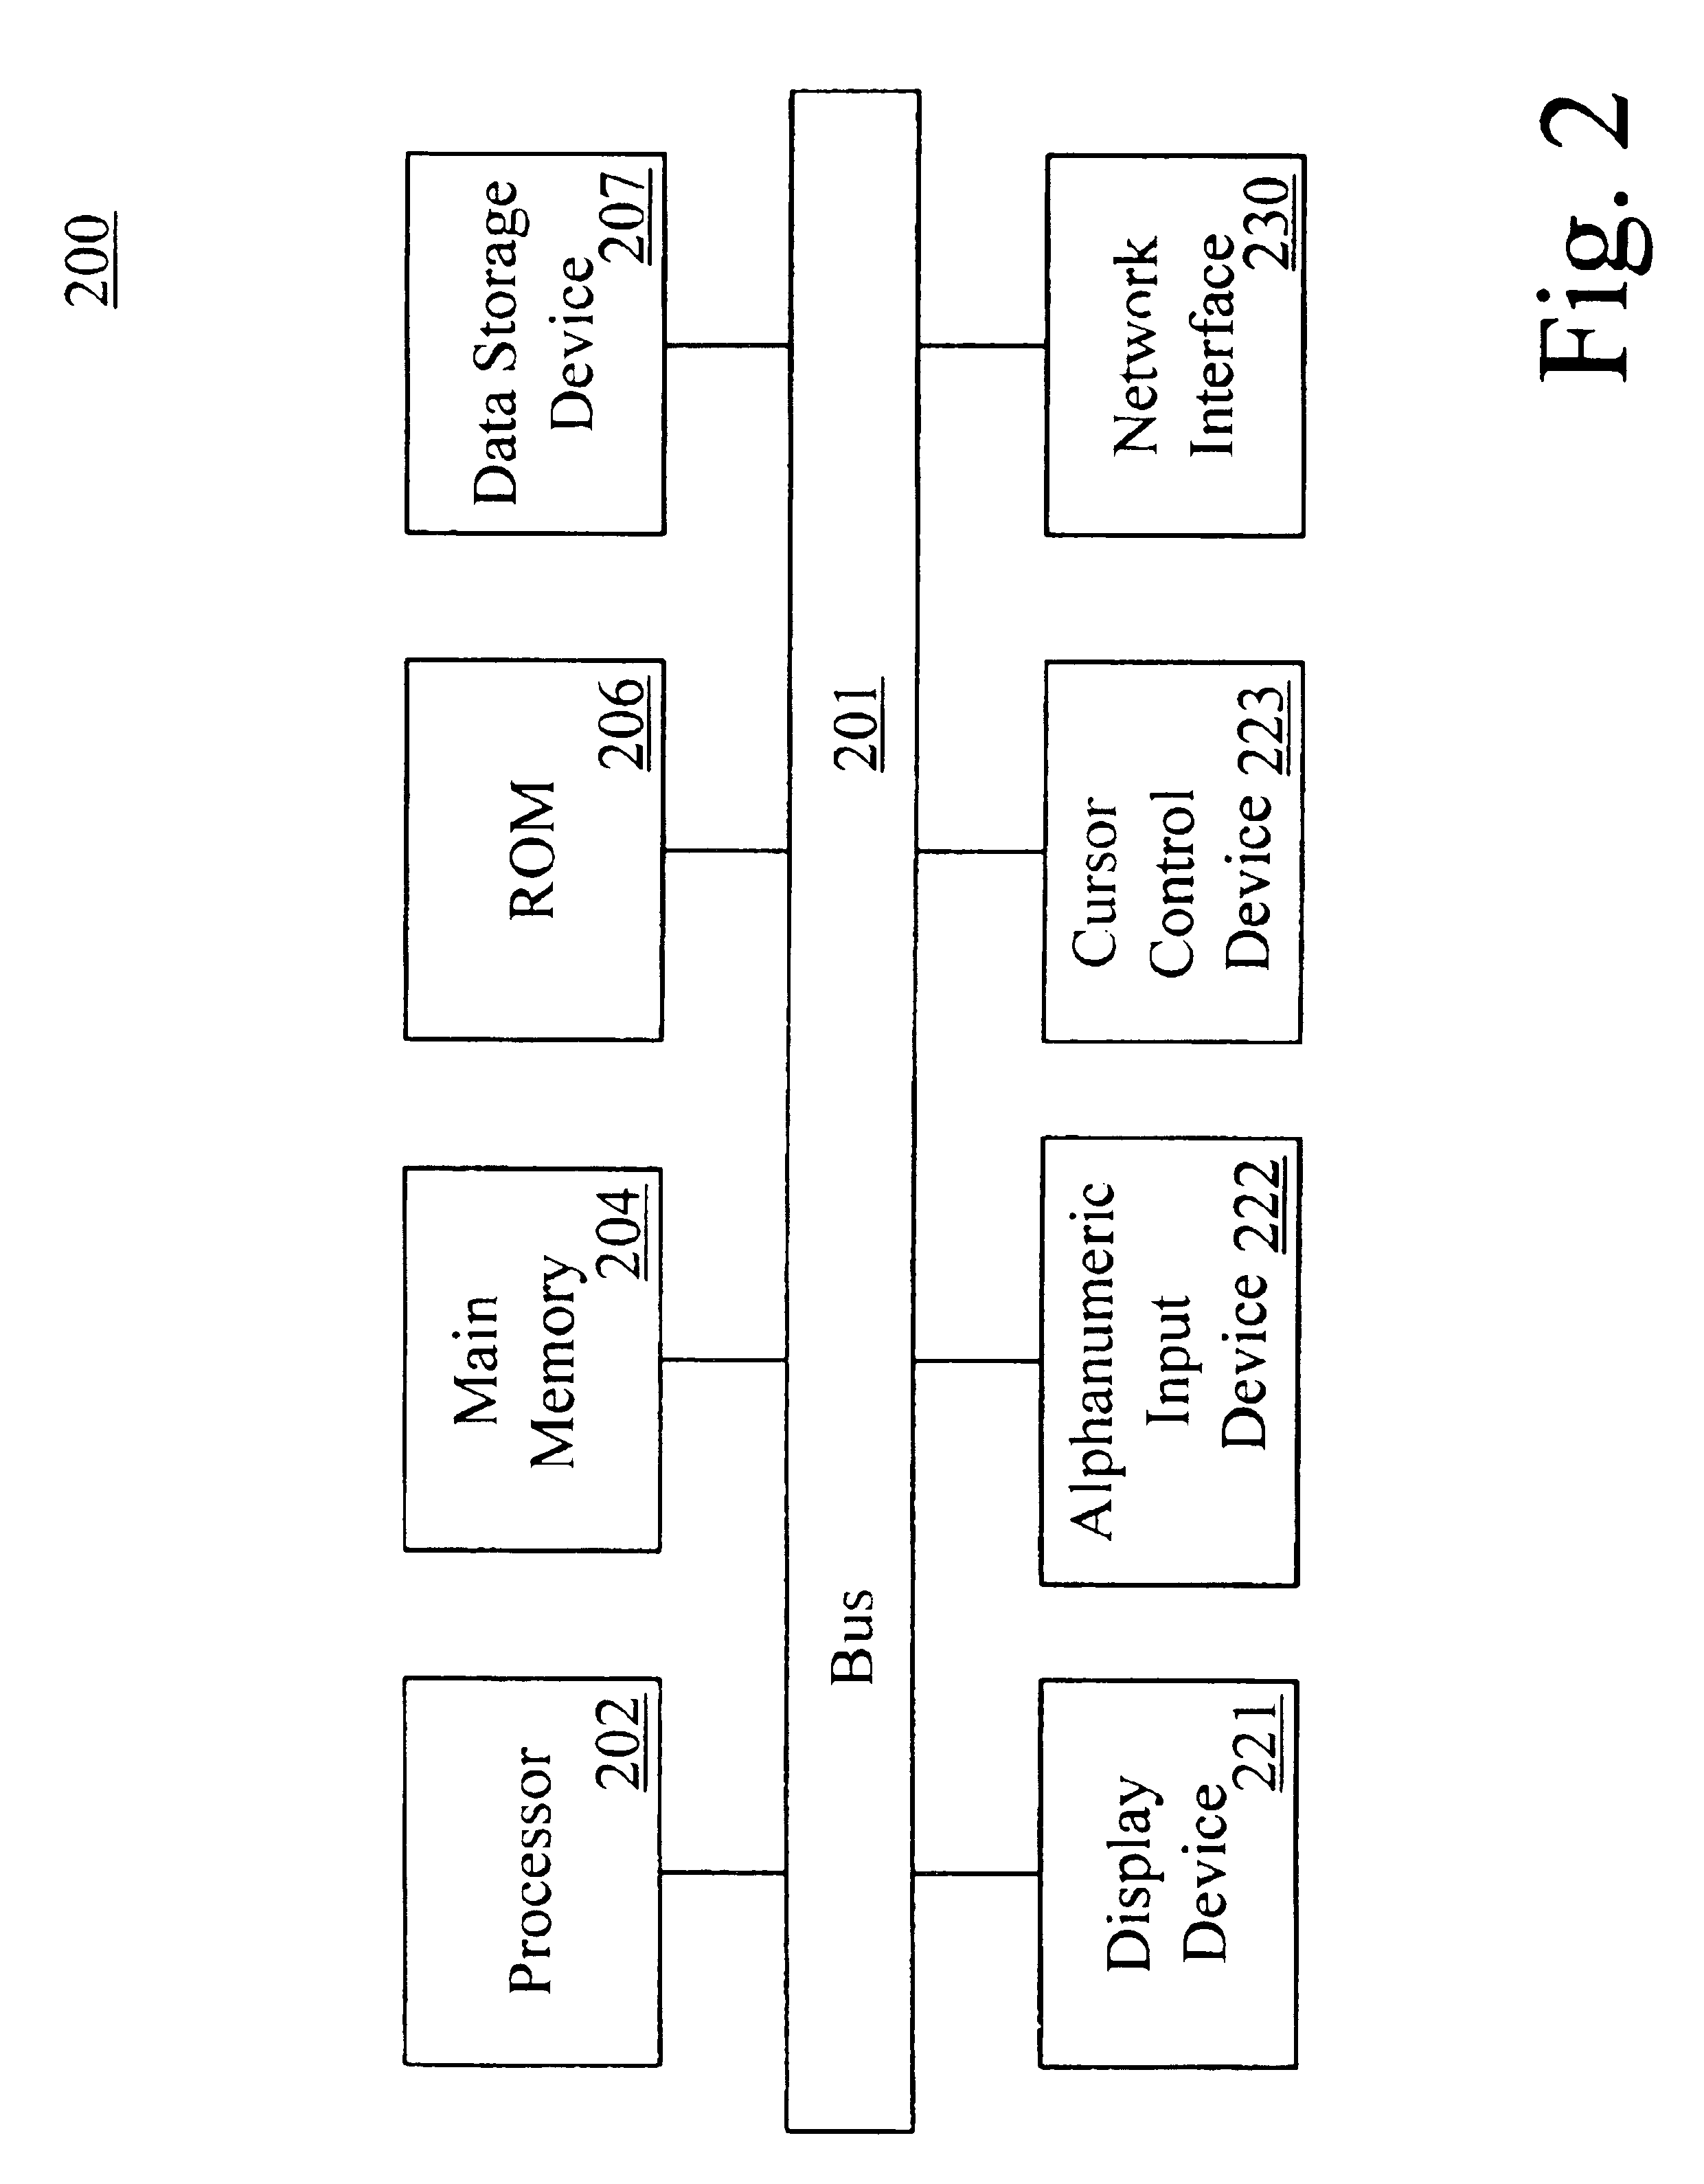 Method and apparatus for automatic product listing